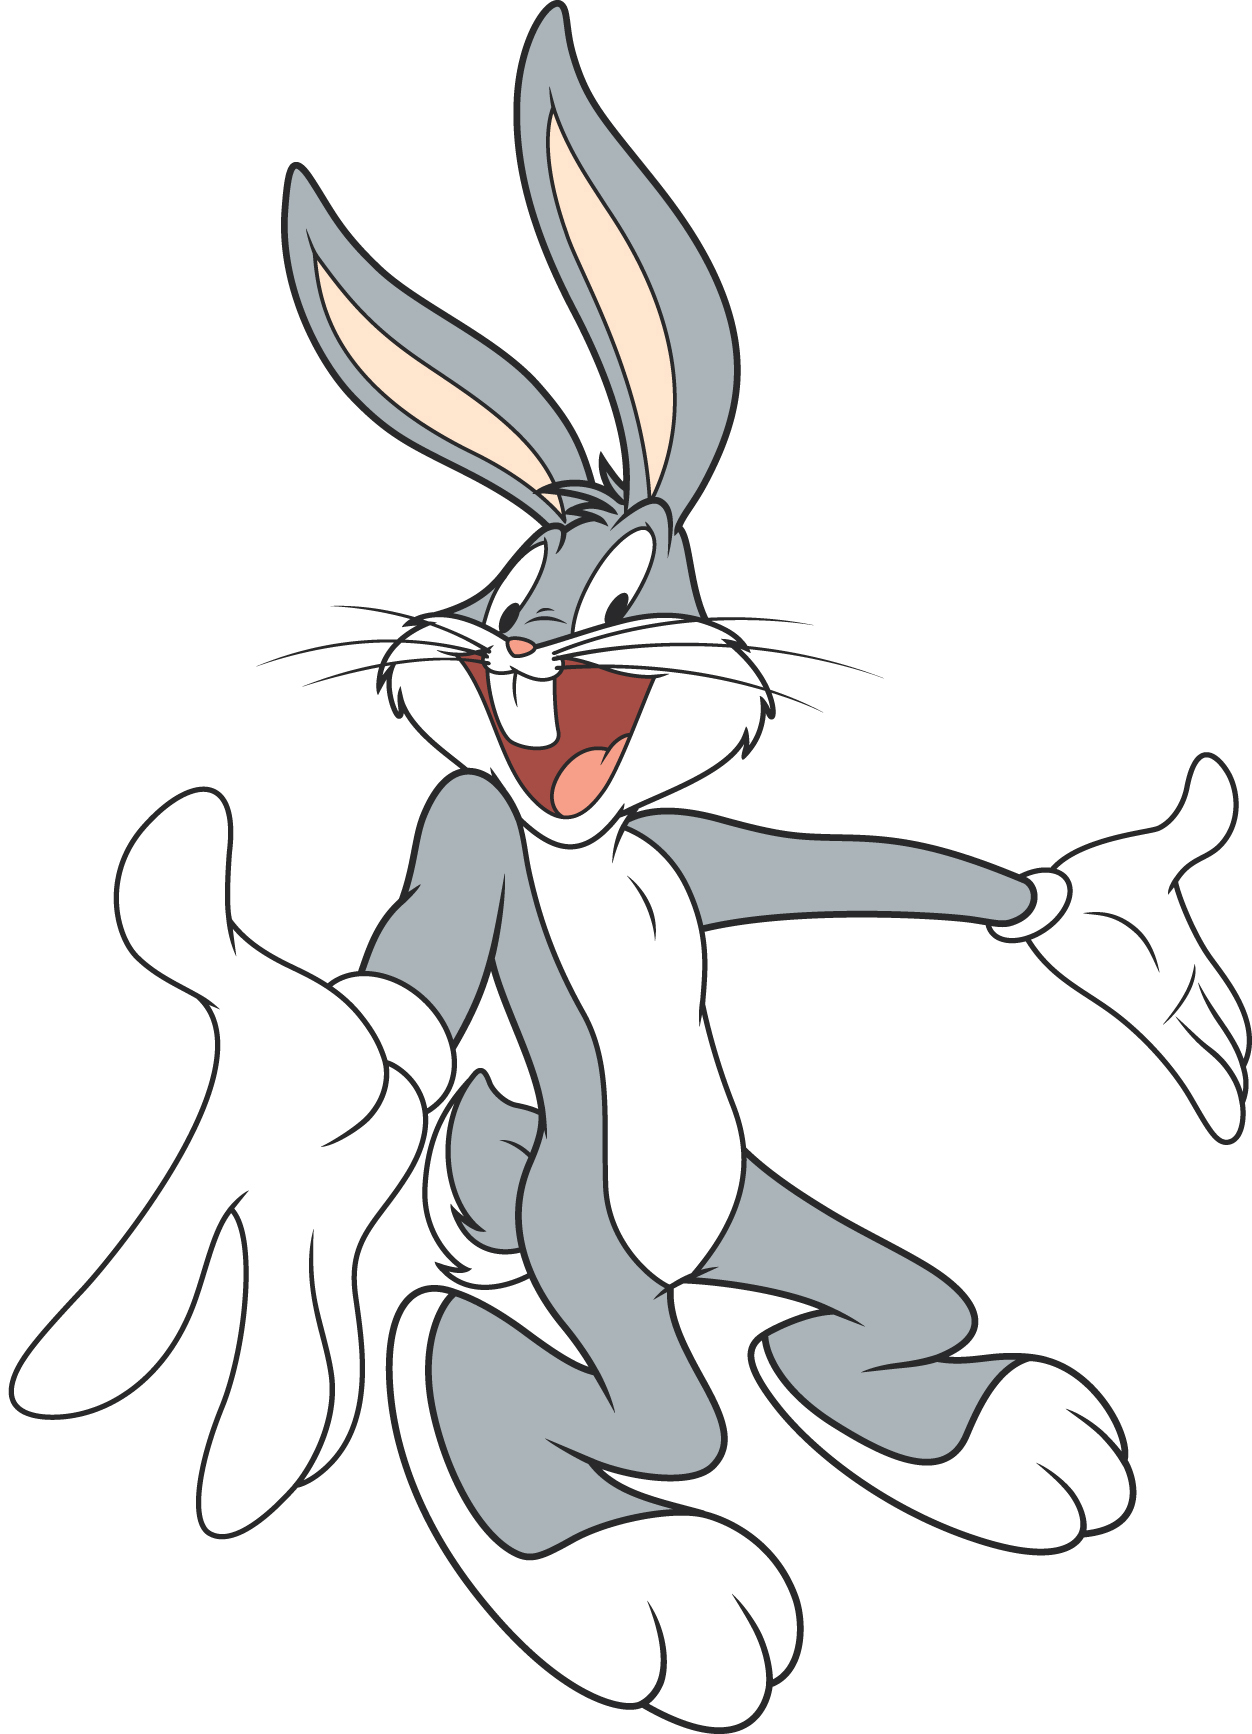 Bugs Bunny/Gallery - Looney Tunes Wiki